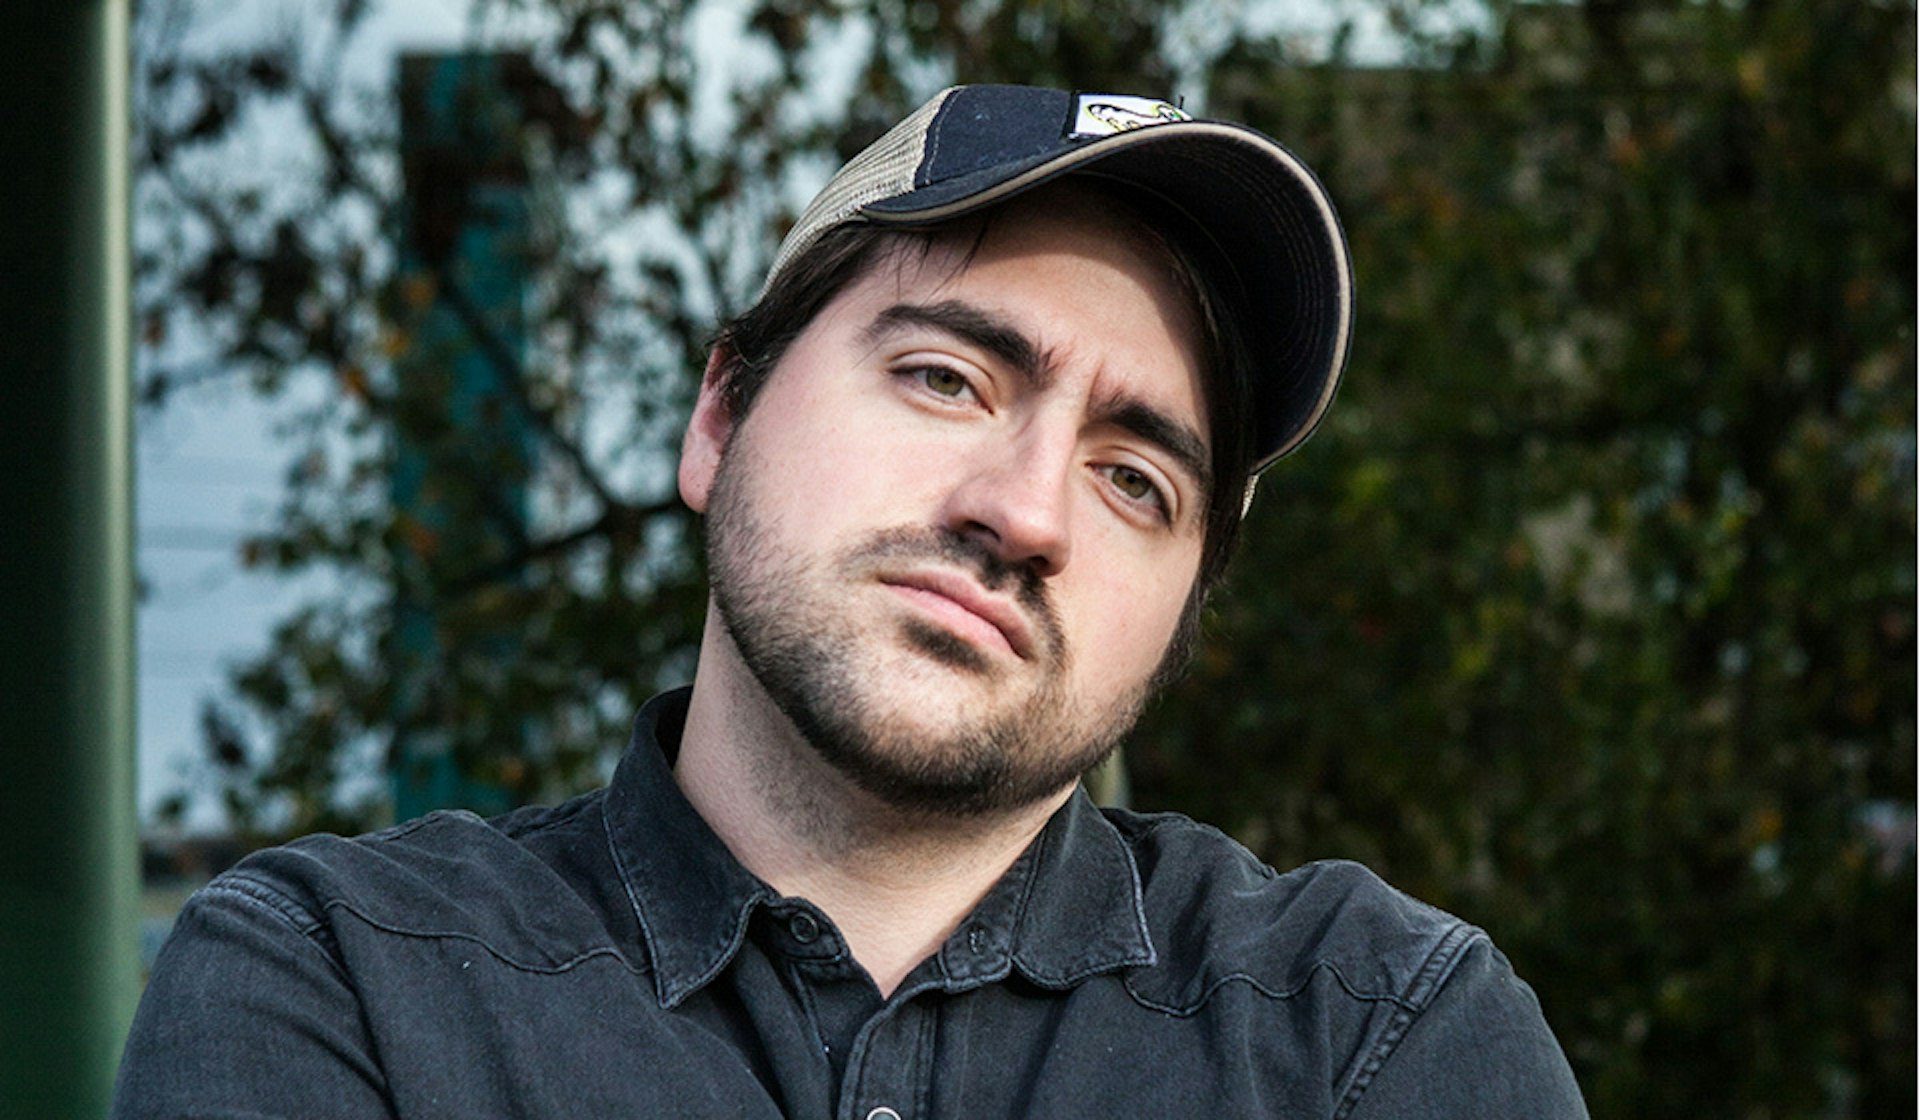 The liberal redneck killing stereotypes with humour